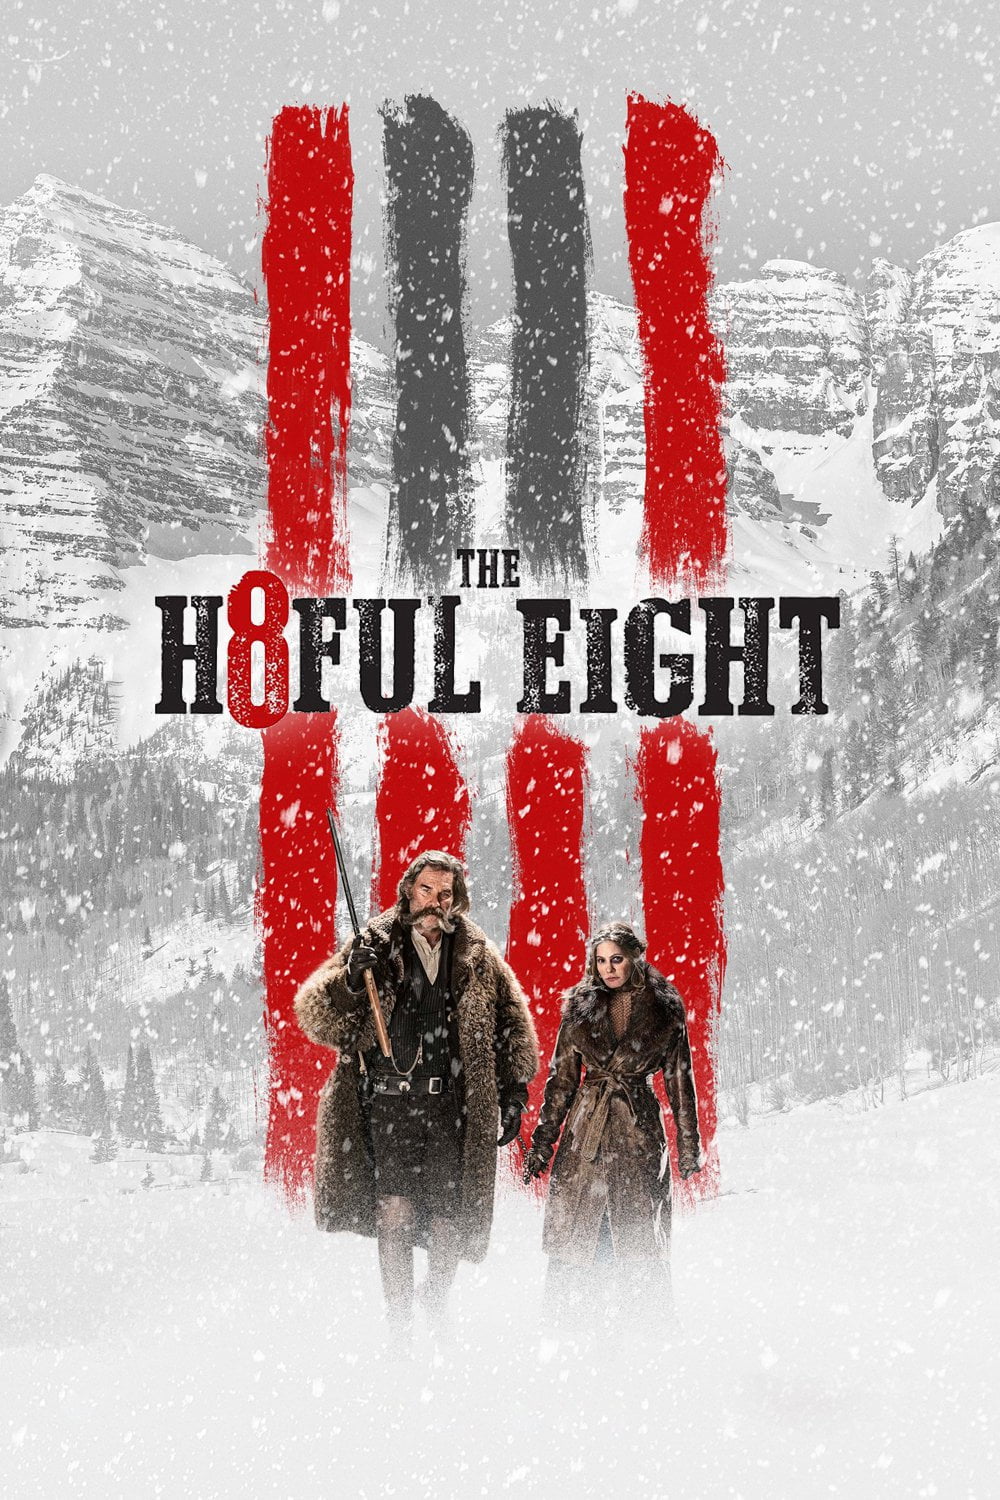 Poster for the filmen "The Hateful Eight"